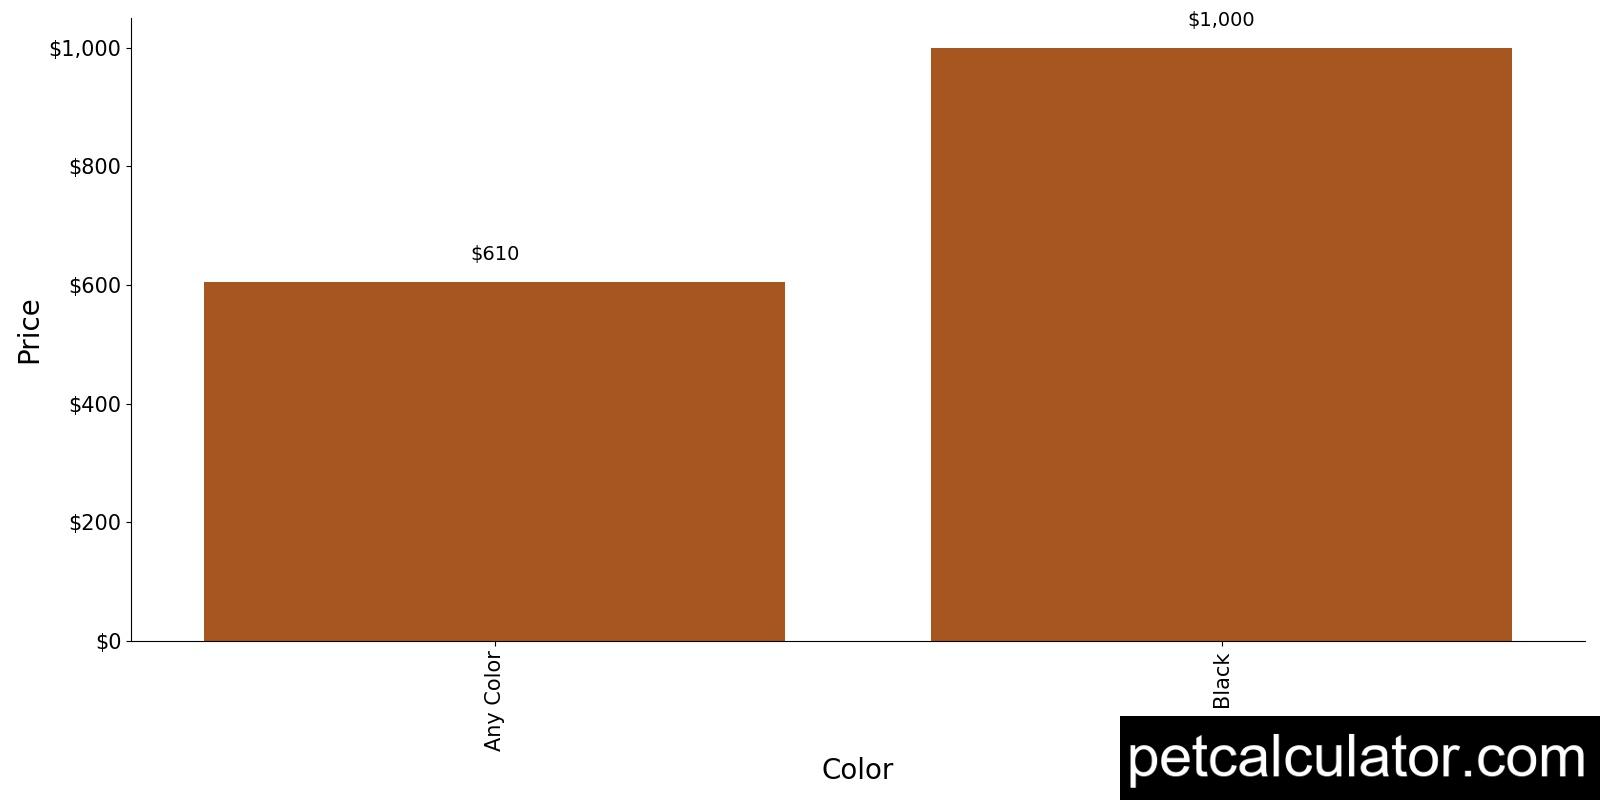 Price of Patterdale Terrier by Color 